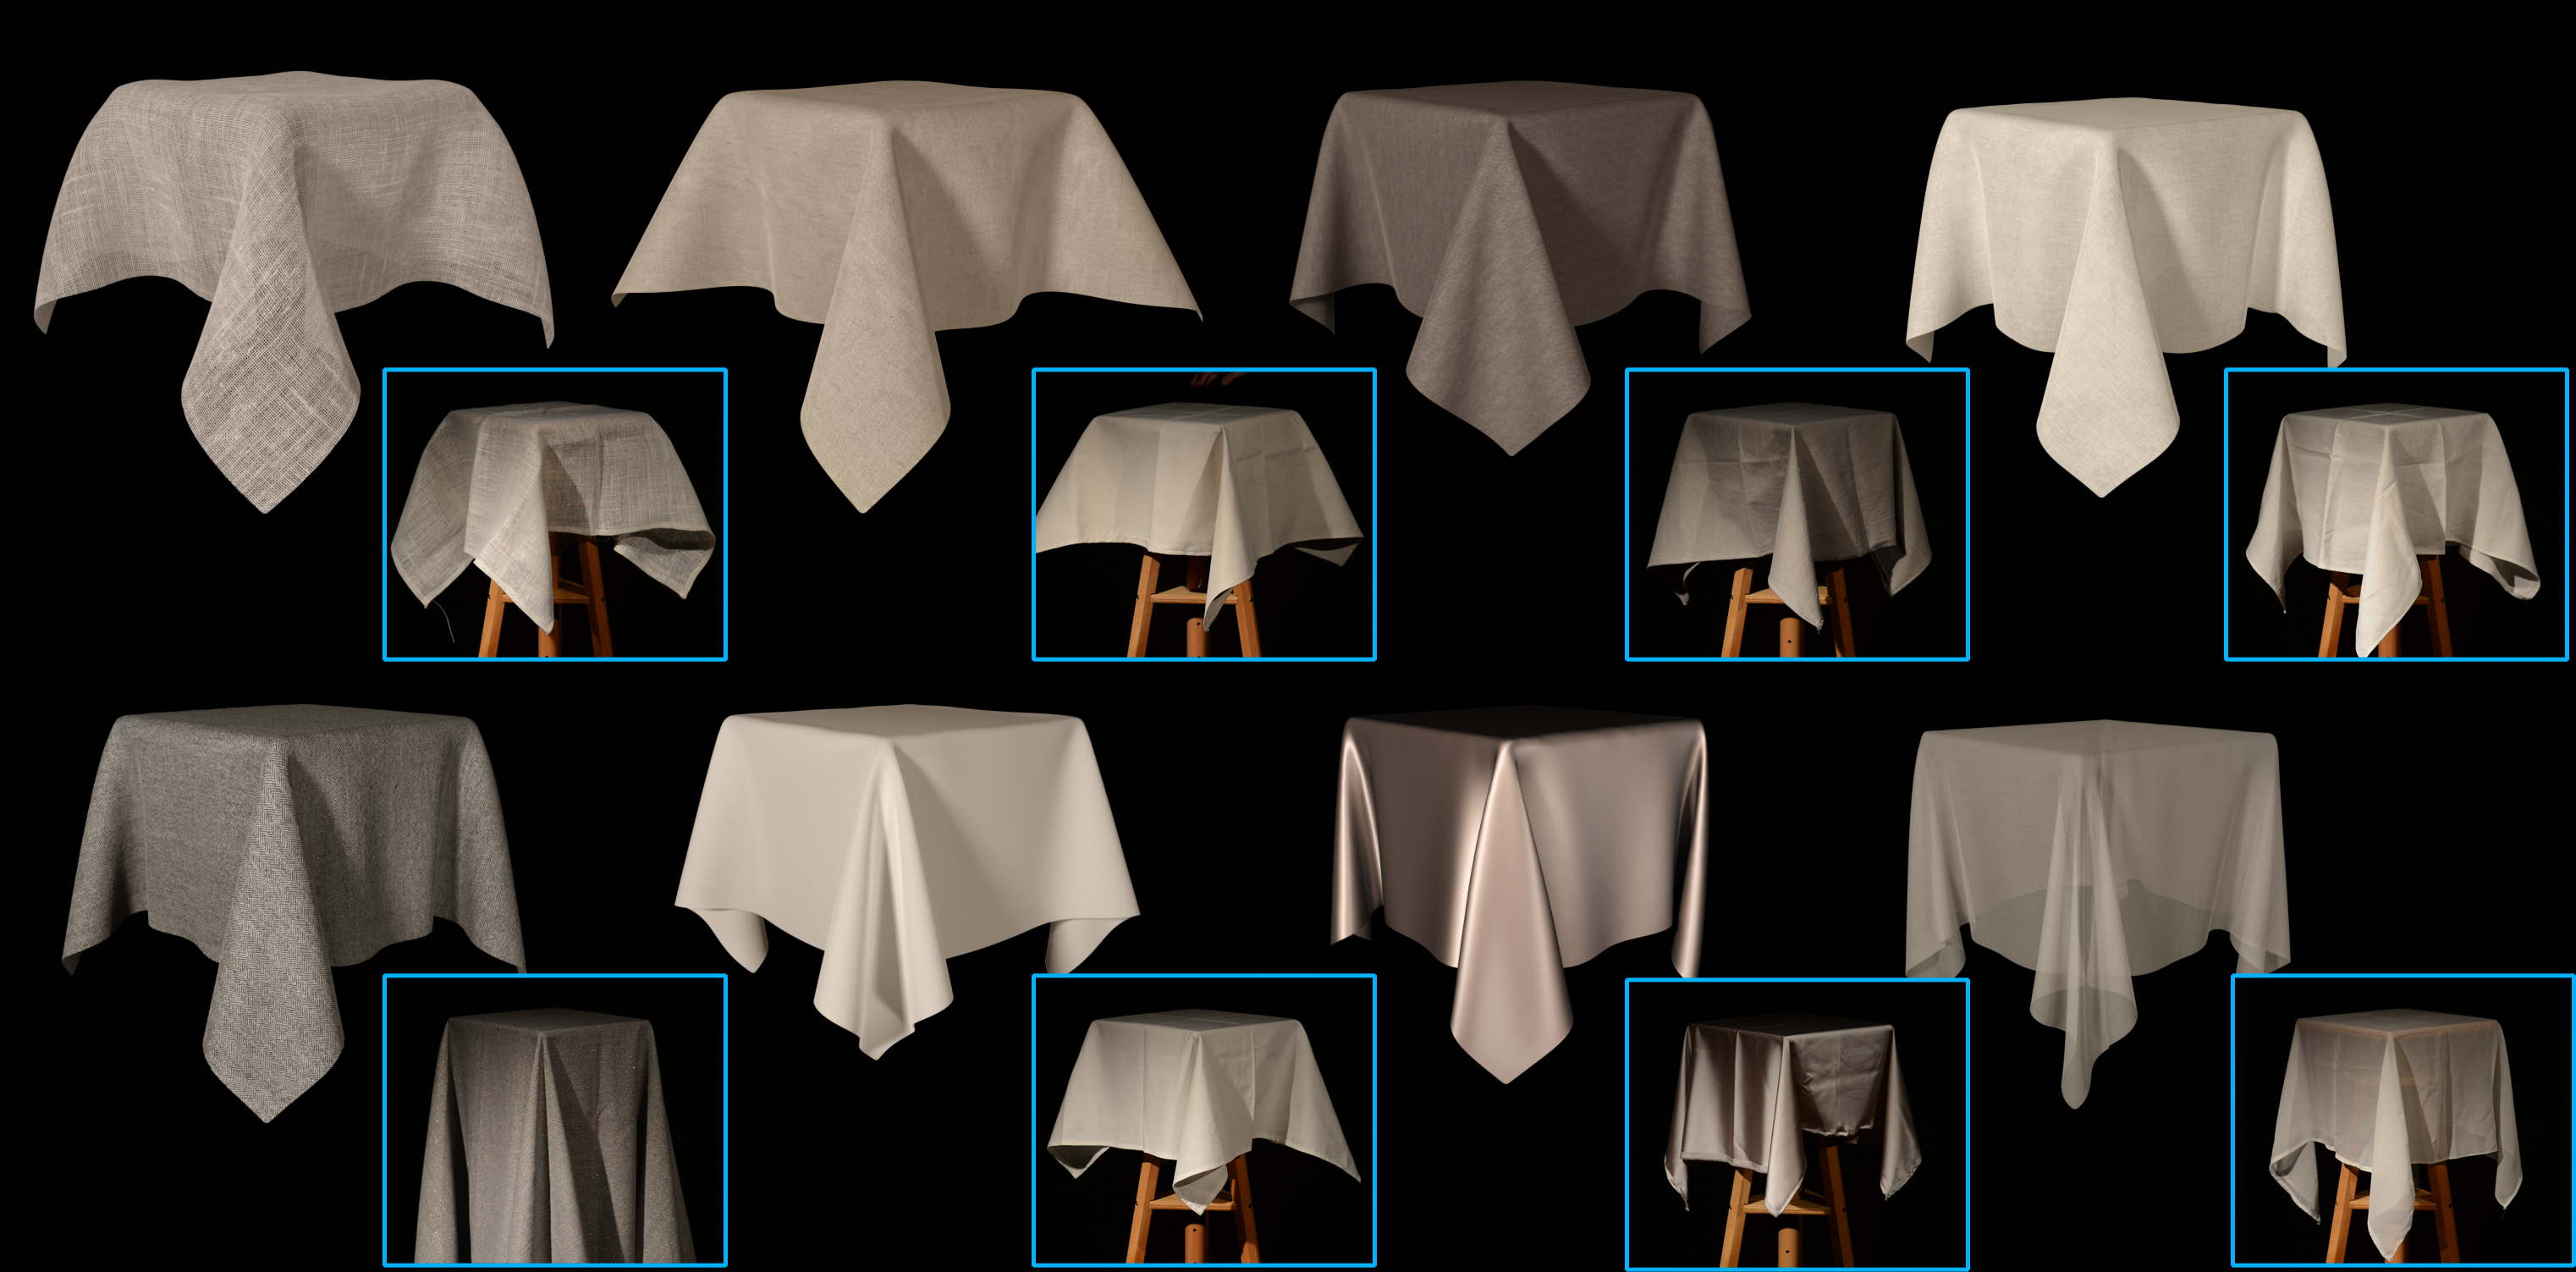 Sackcloth or Silk? The Impact of Appearance vs Dynamics on the Perception of Animated Cloth-Image